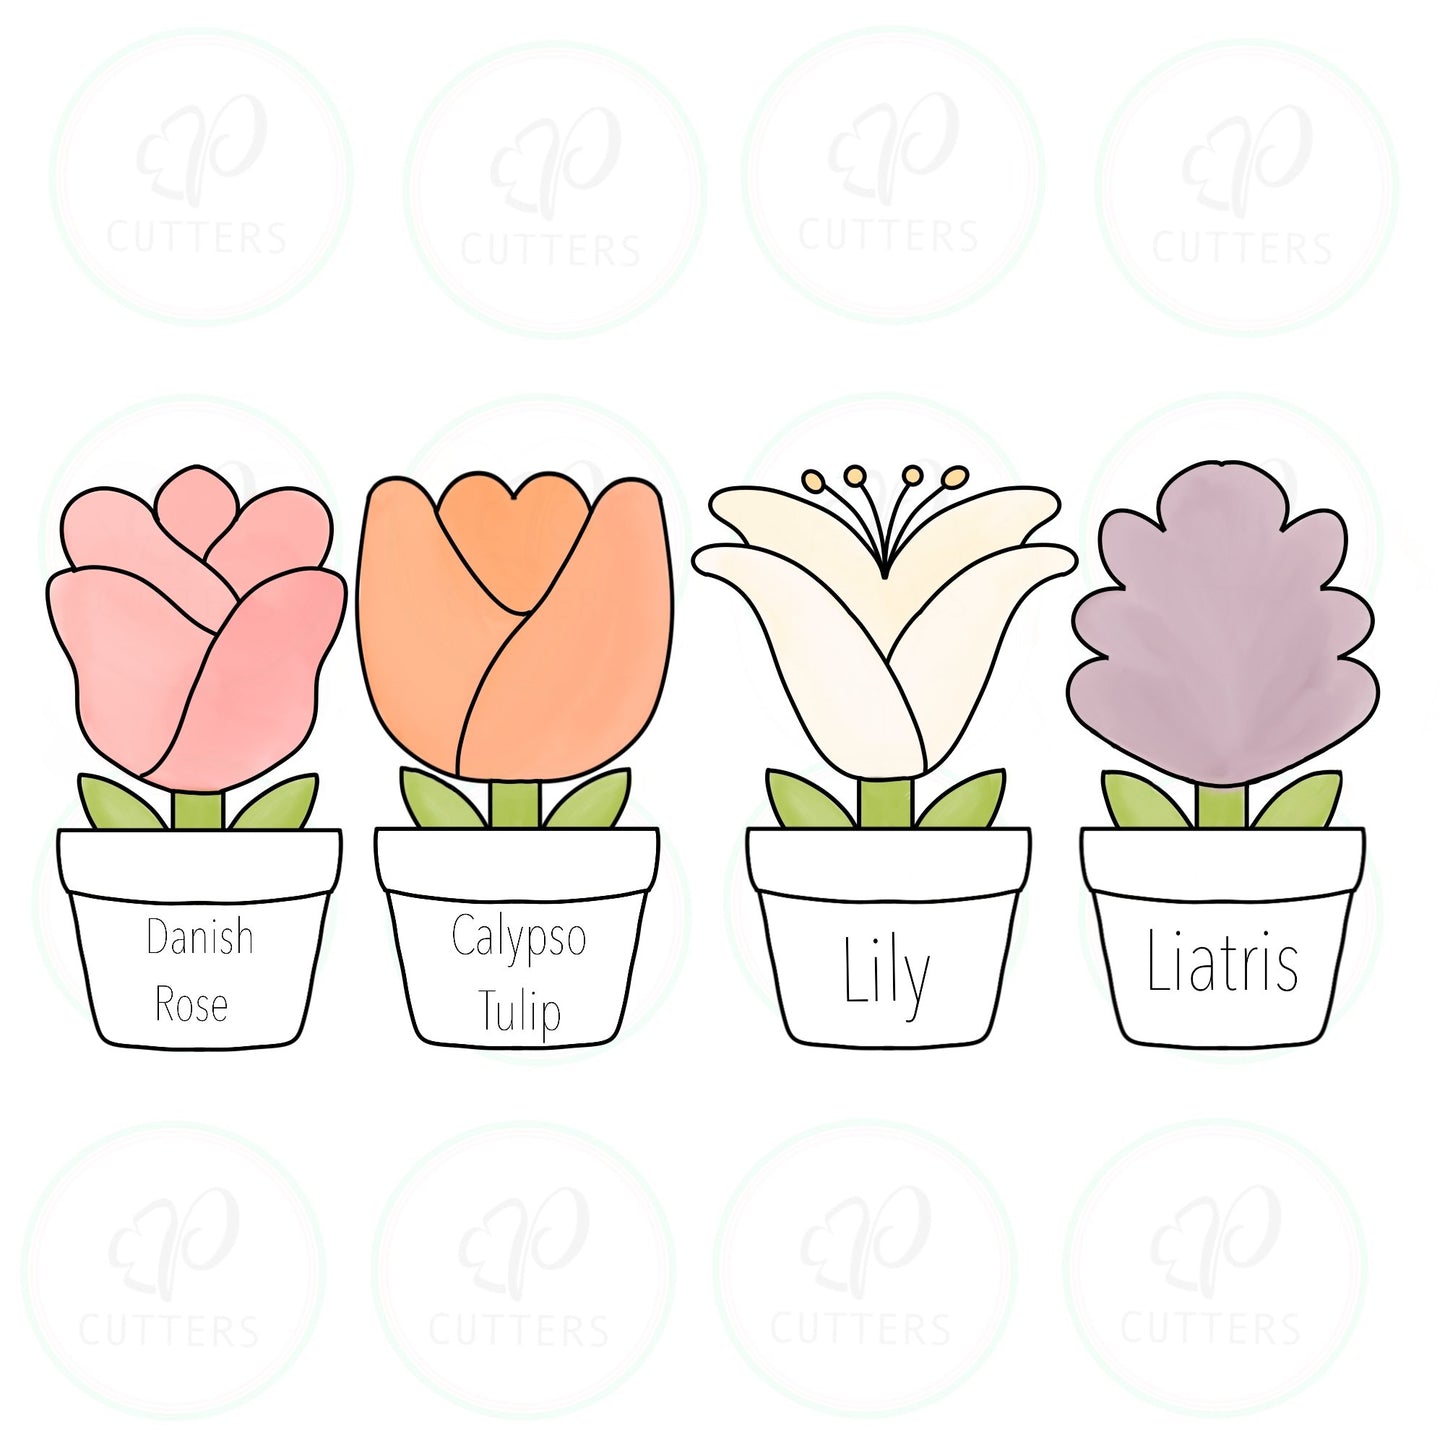 Flowers in a Pot Cookie Cutter Set B - Danish Rose - Tulip Calypso - Lilly - Liatris - Periwinkles Cutters